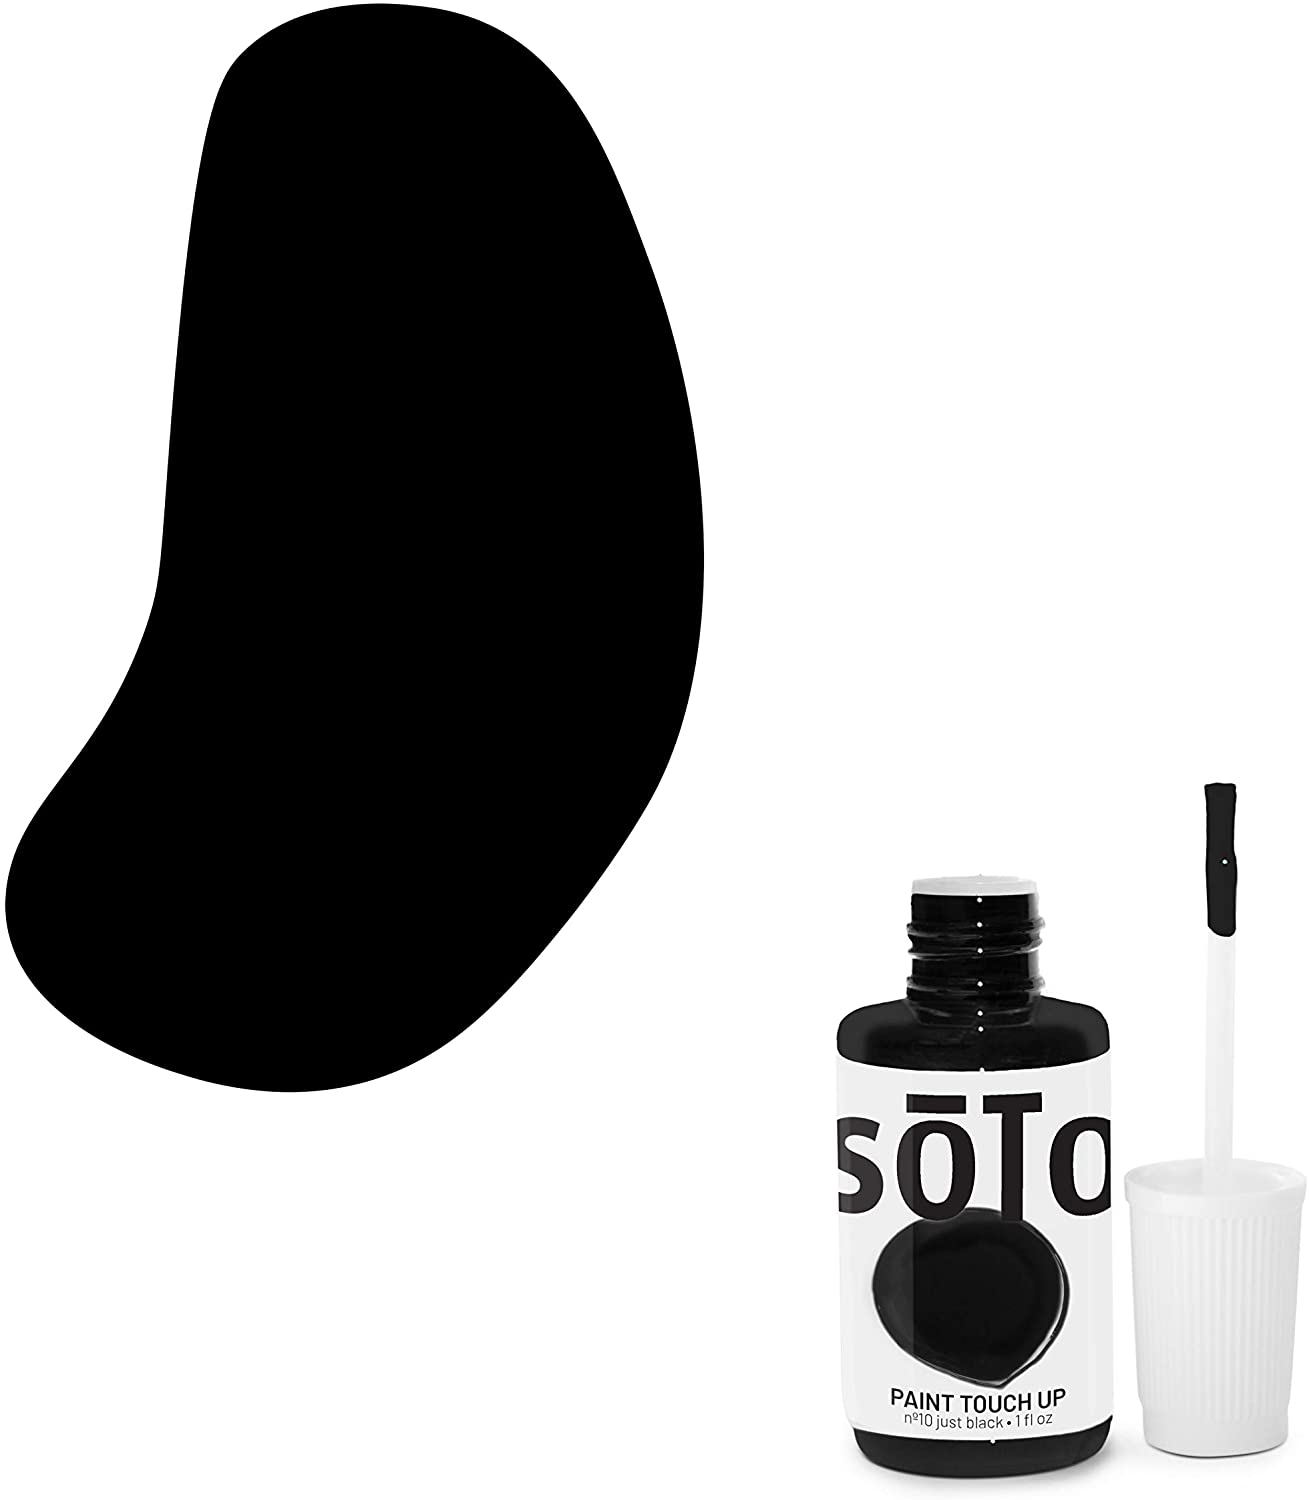 soto Multi-purpose Paint Touch Up